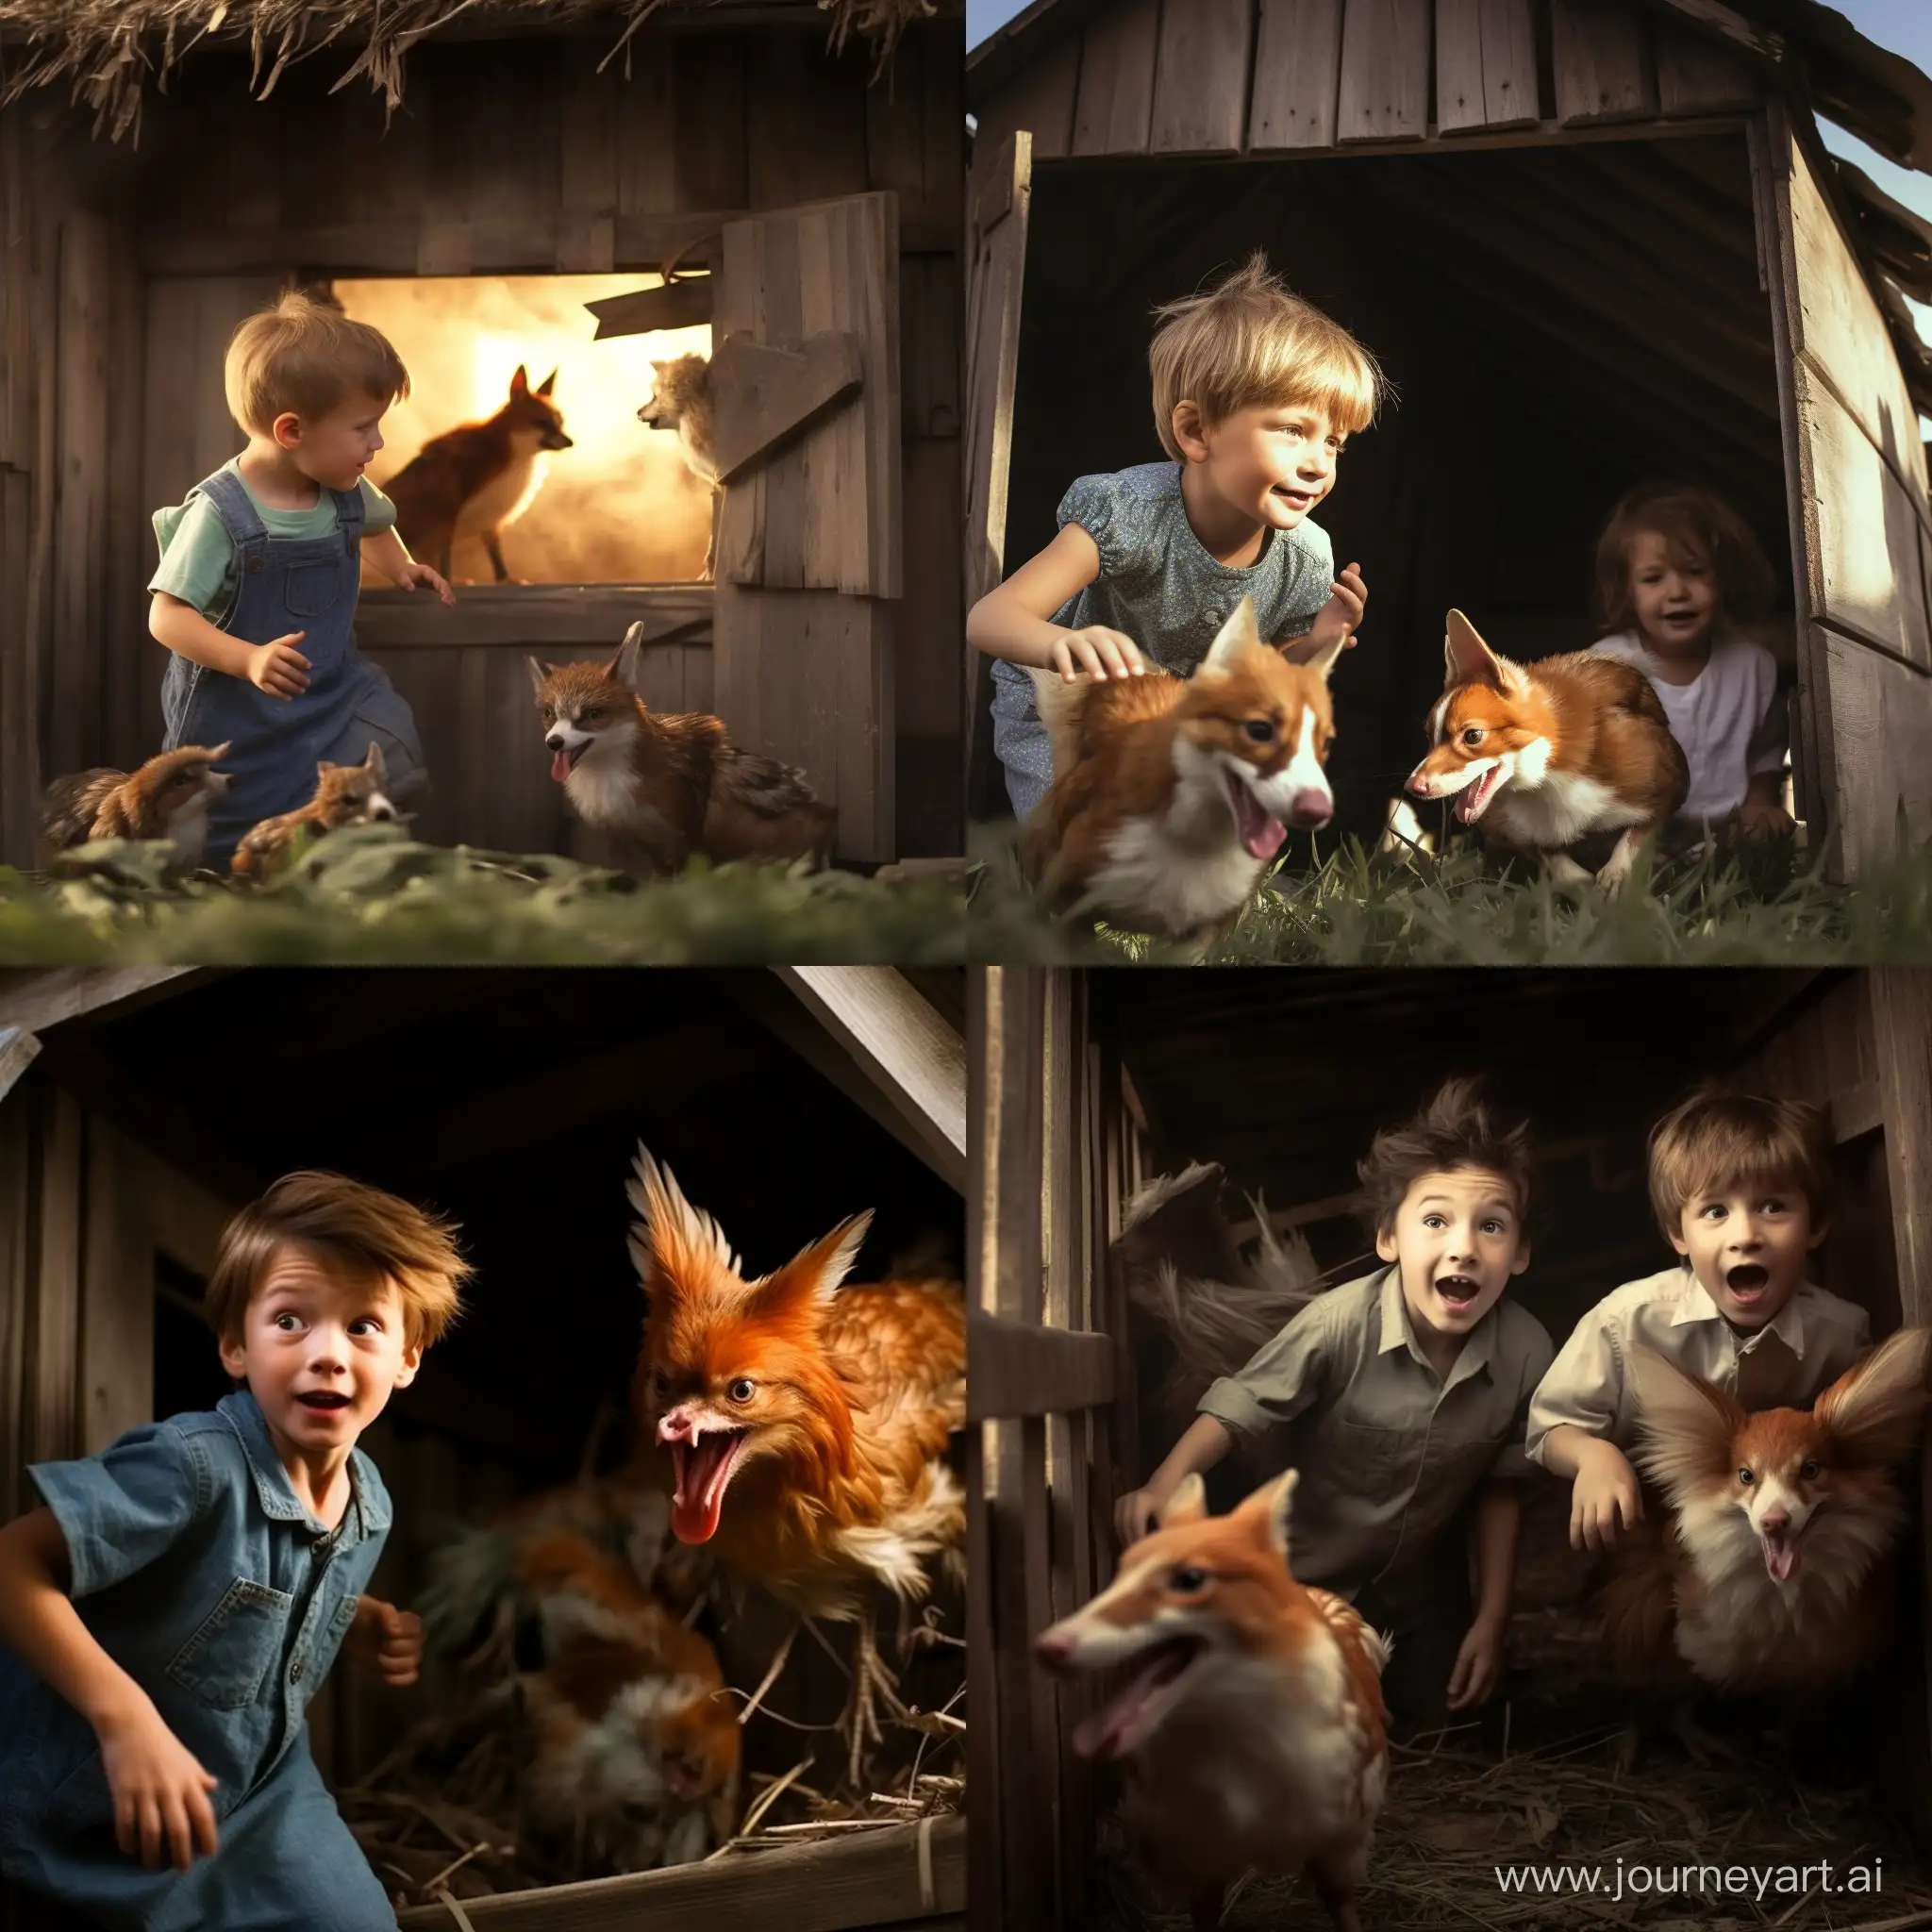 Fox-Sneaking-into-Chicken-Coop-with-Panicking-Chickens